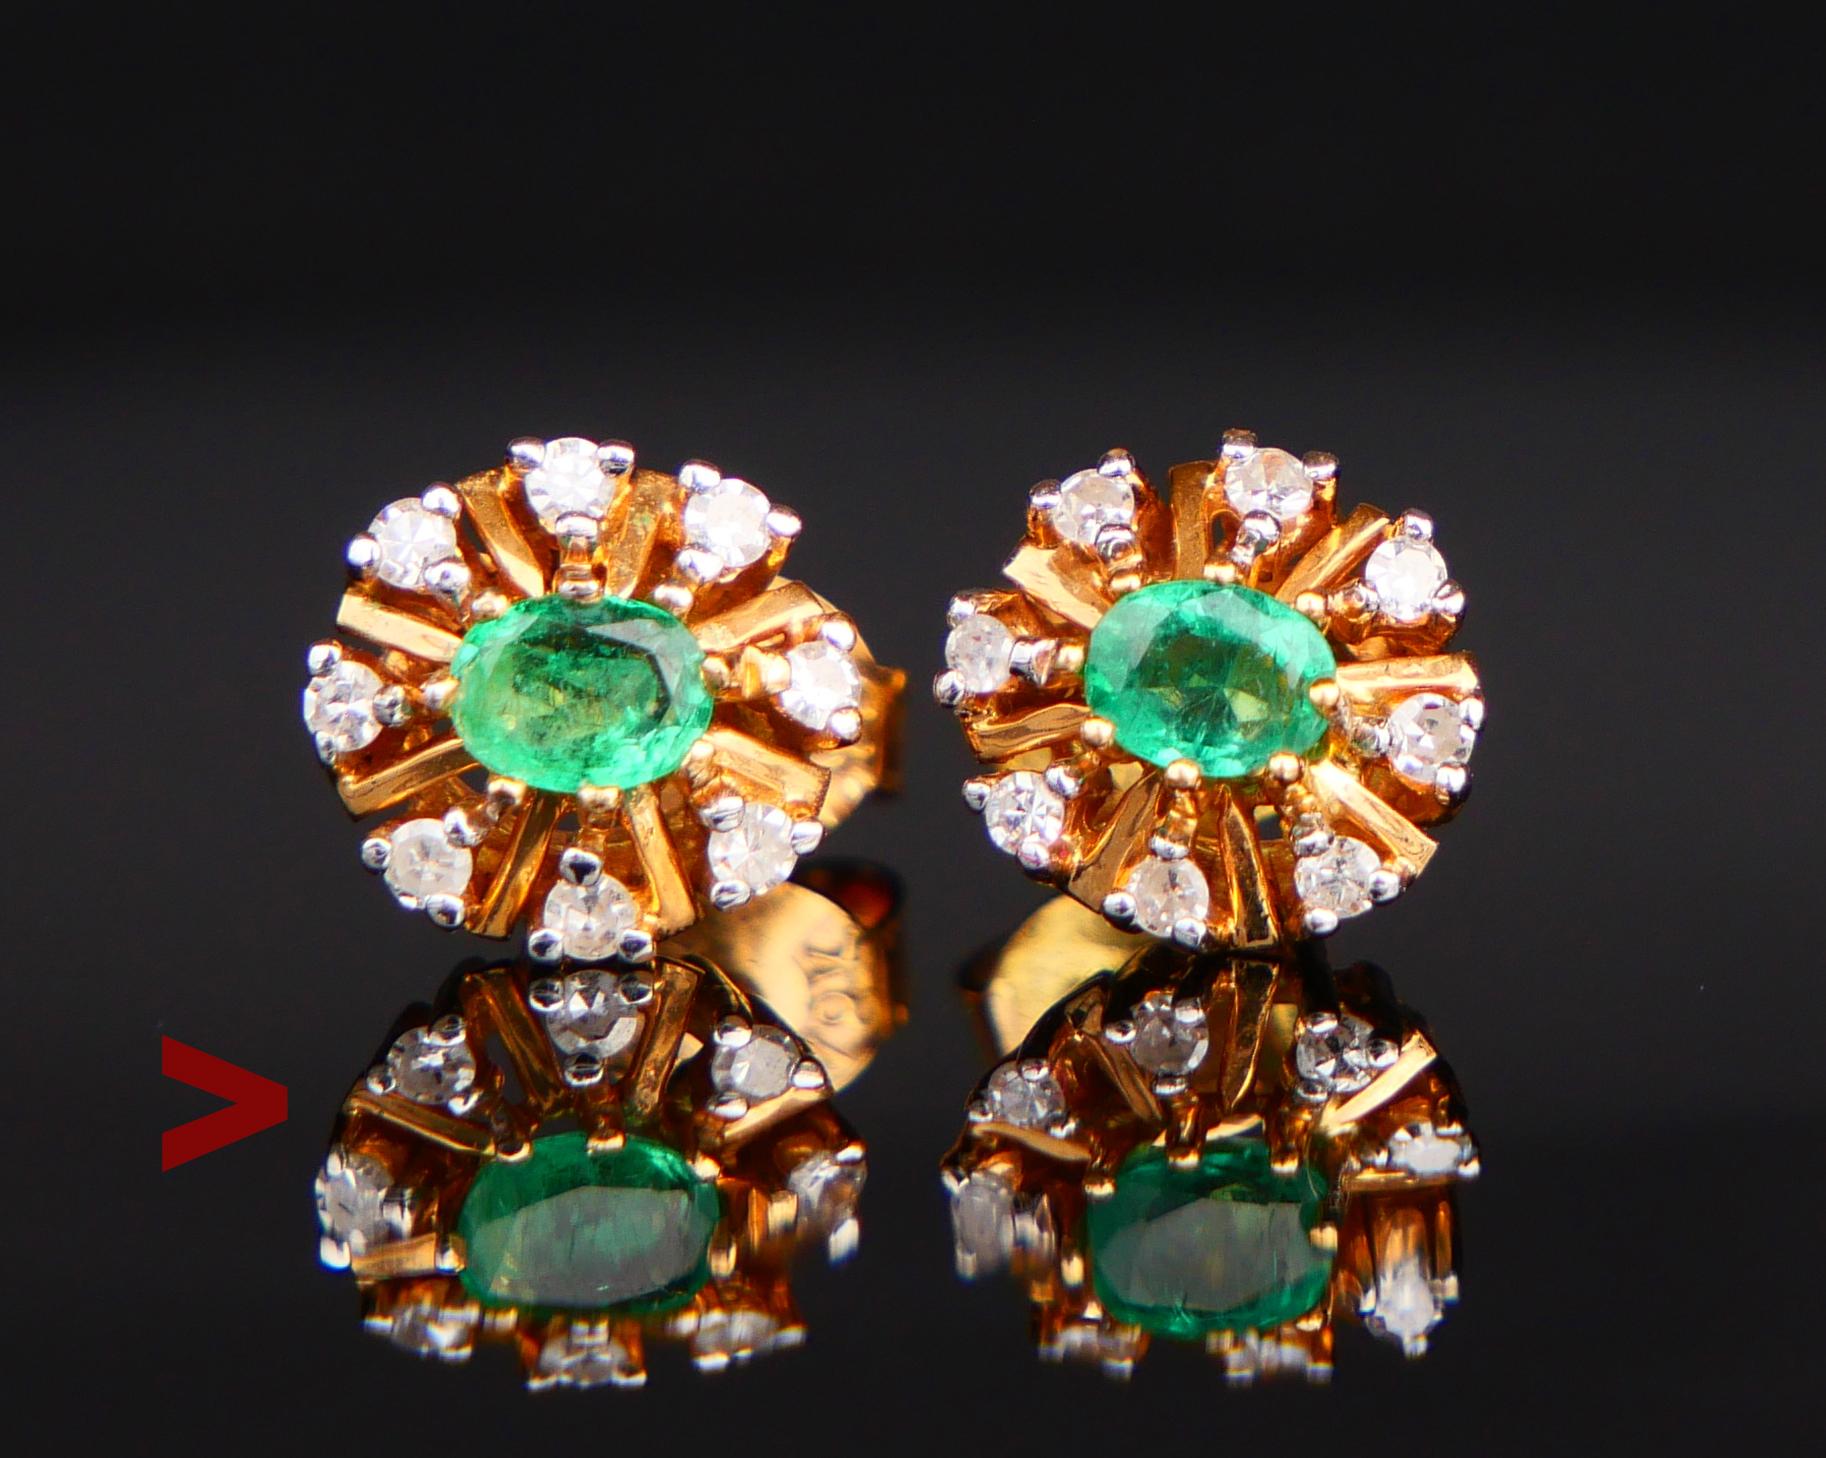 A pair of fine flower studs in solid 18K Yellow and White Gold.

European sisters made ca. 1960s -1970s.

Two oval cut natural oval green Emeralds 4 x 3 mm / ca.0.2 ct each, both demonstrate flaws and inclusions typical for naturals.

Each Emerald